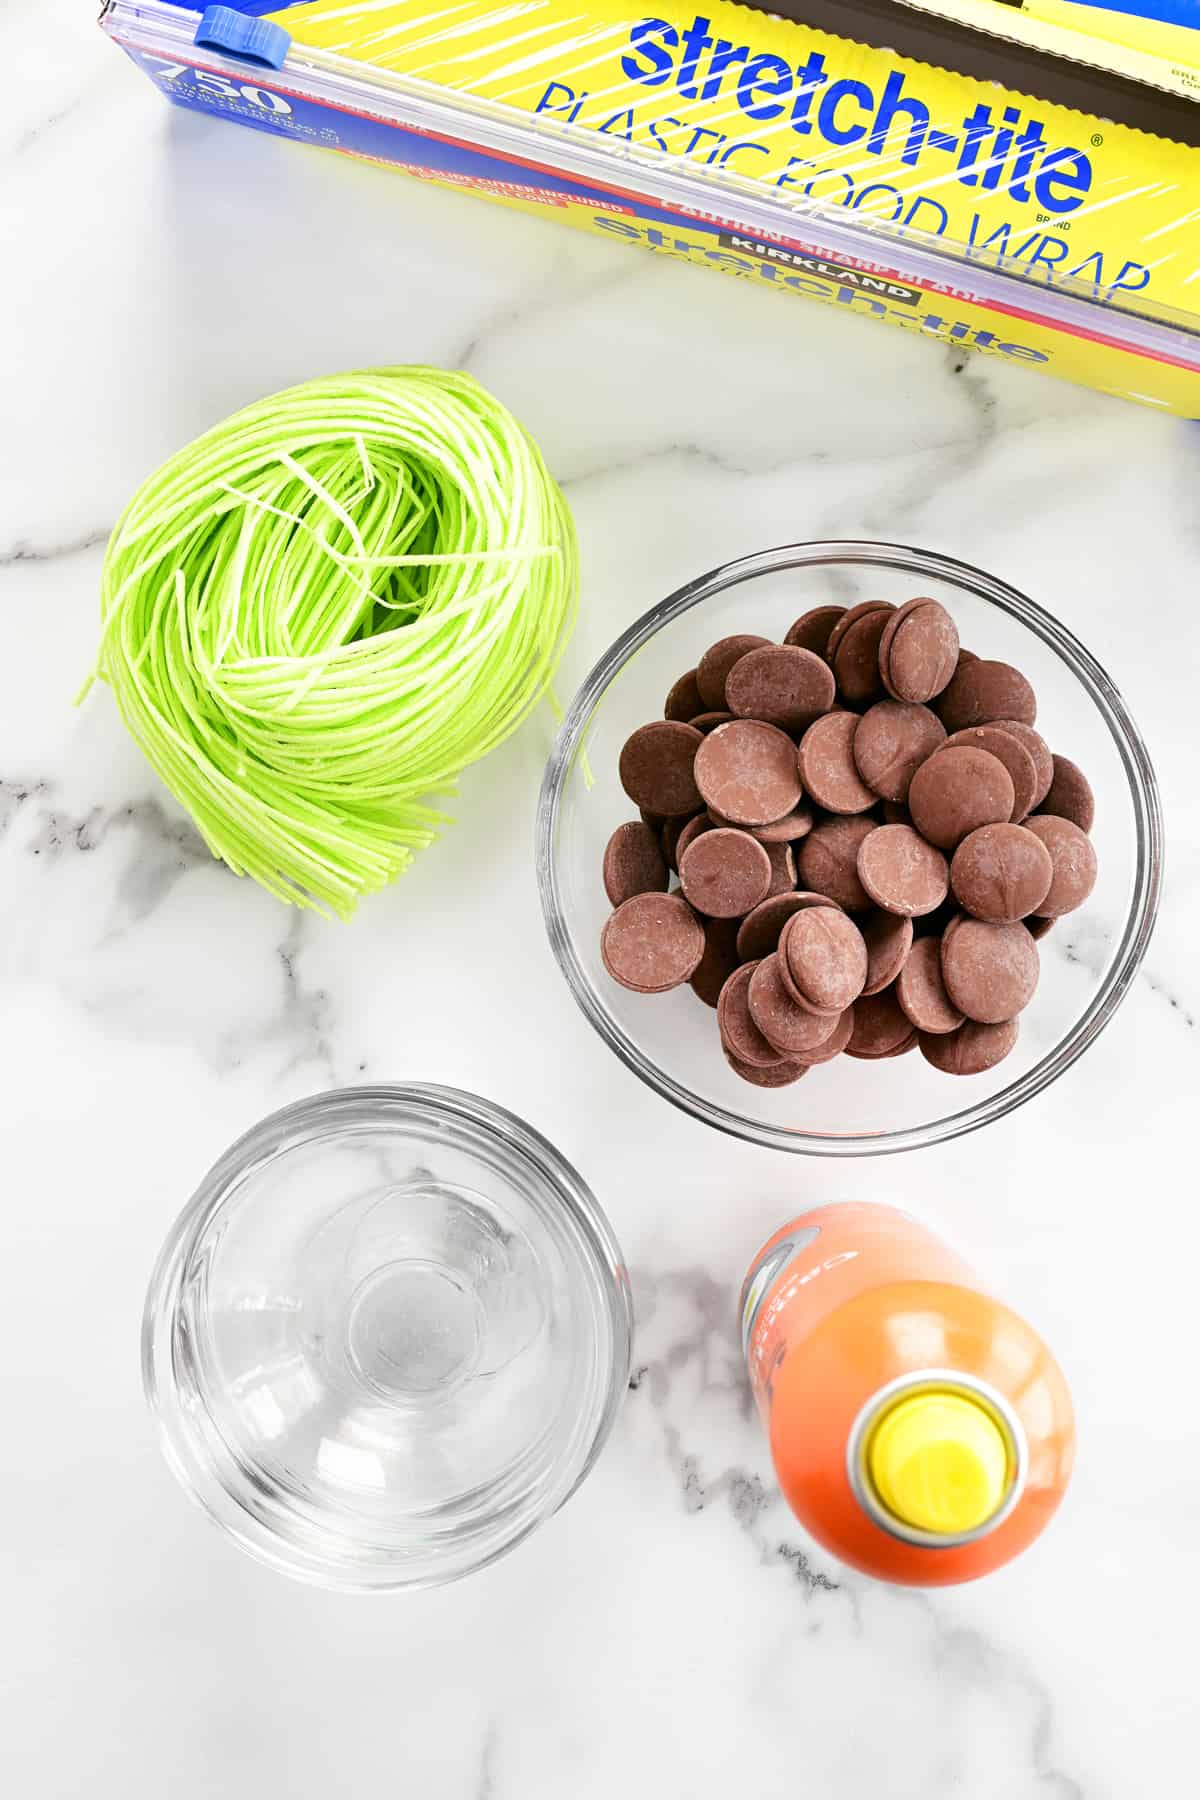 ingredients for chocolate nests.